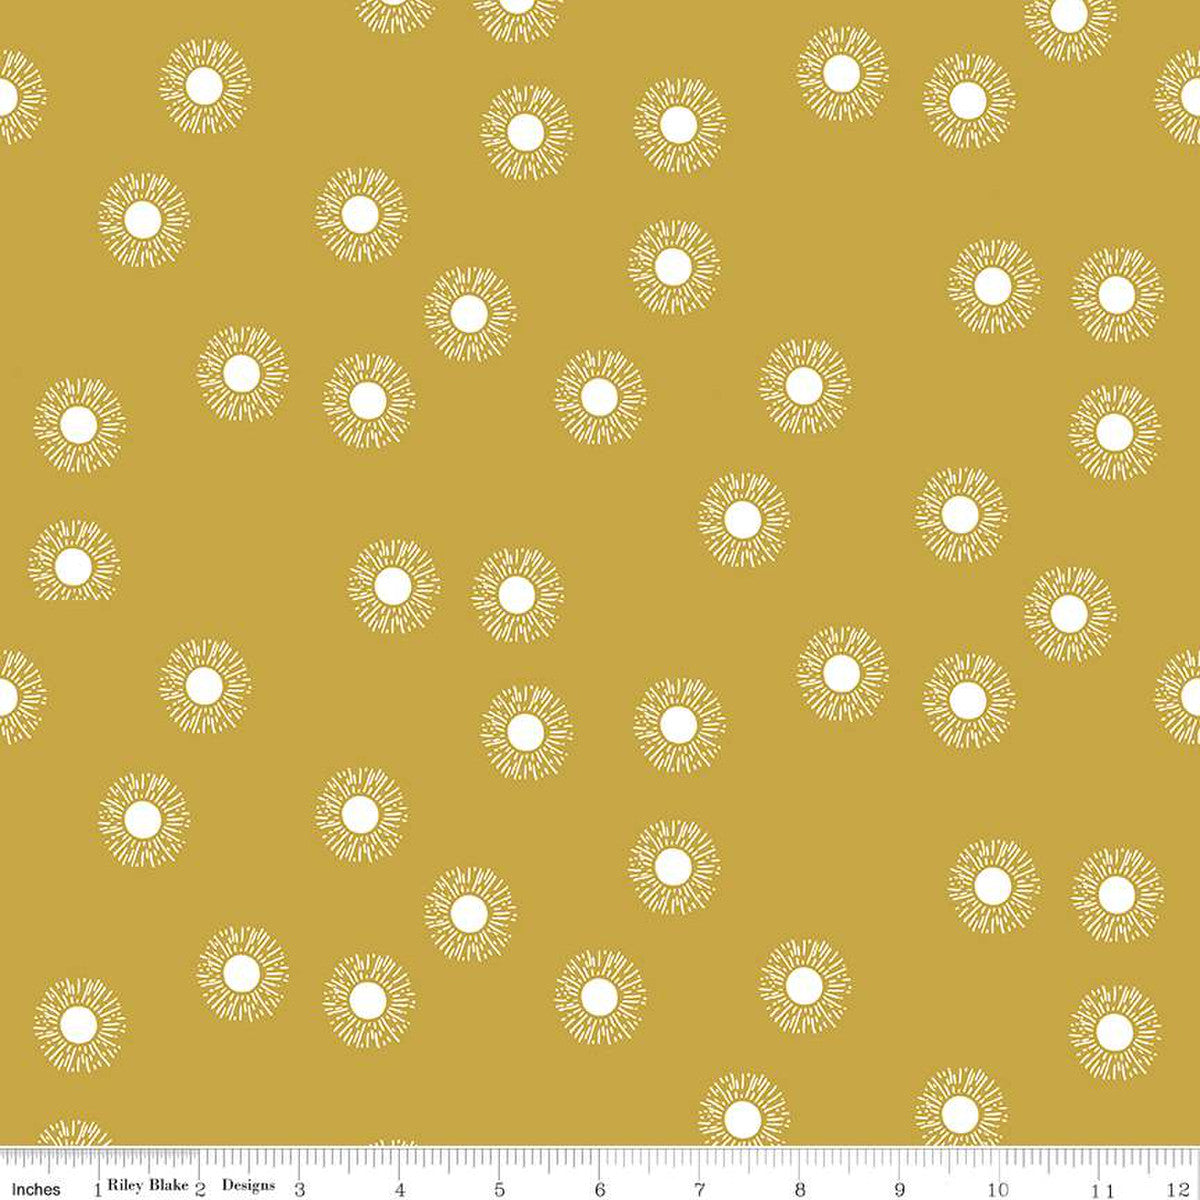 Manufacturer: Riley Blake Designs Designer: Fran Gulick of Cotton and Joy Collection: Moonchild Print Name: Sunrise in Curry Material: 100% Cotton Weight: Quilting SKU: SC13824-CURRY Width: 44 inches